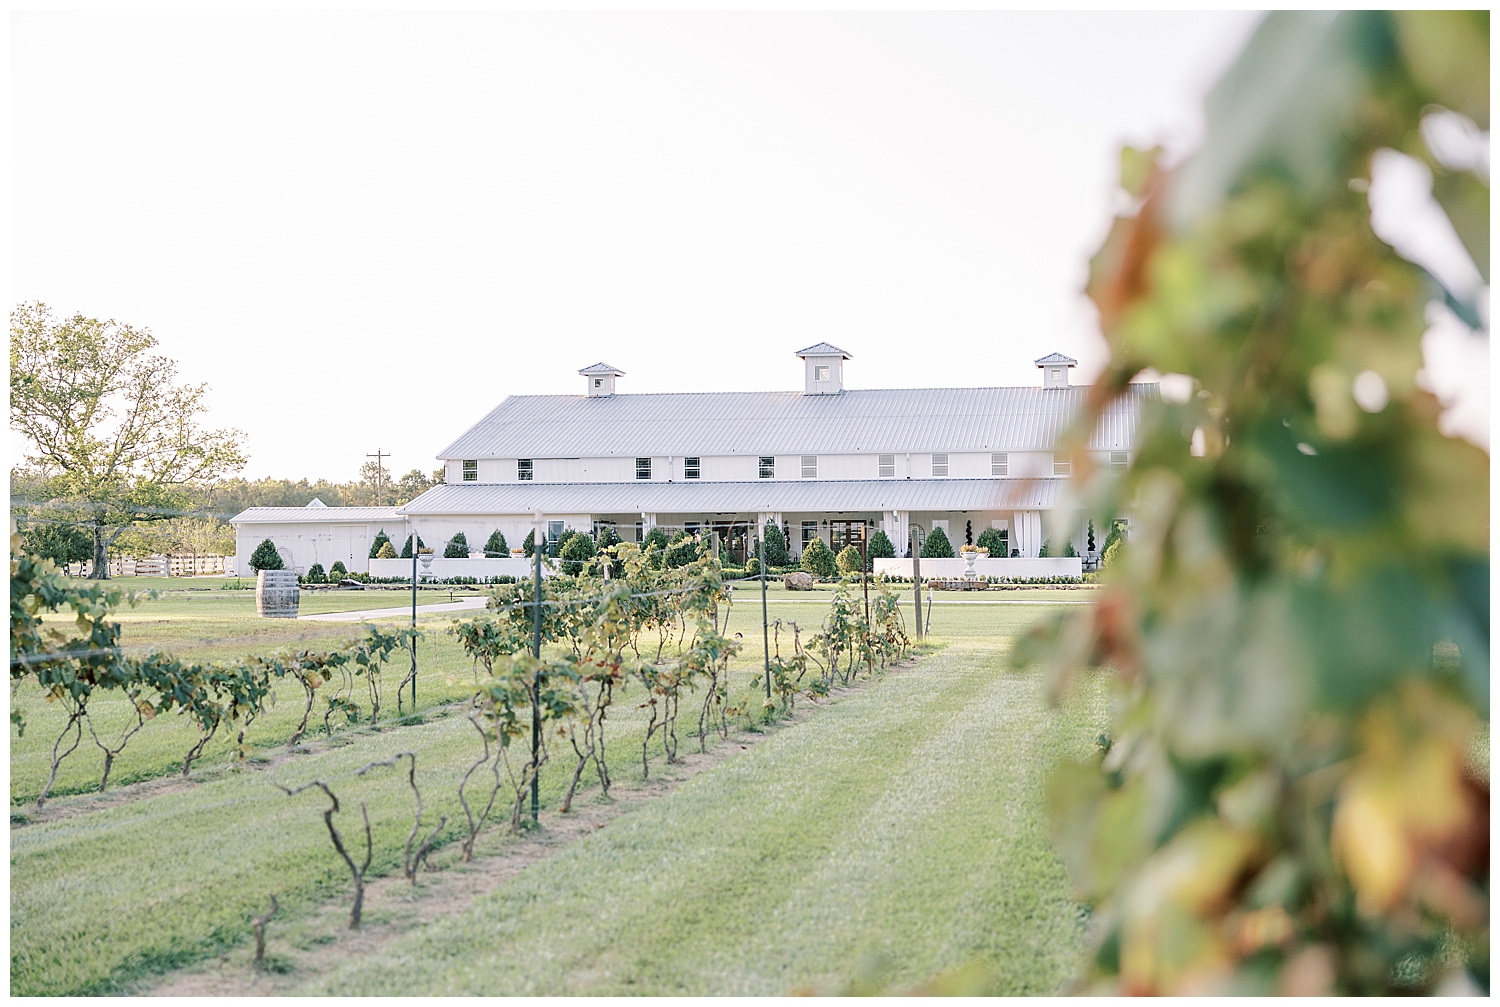 The venue sits between the vineyards at sunset.